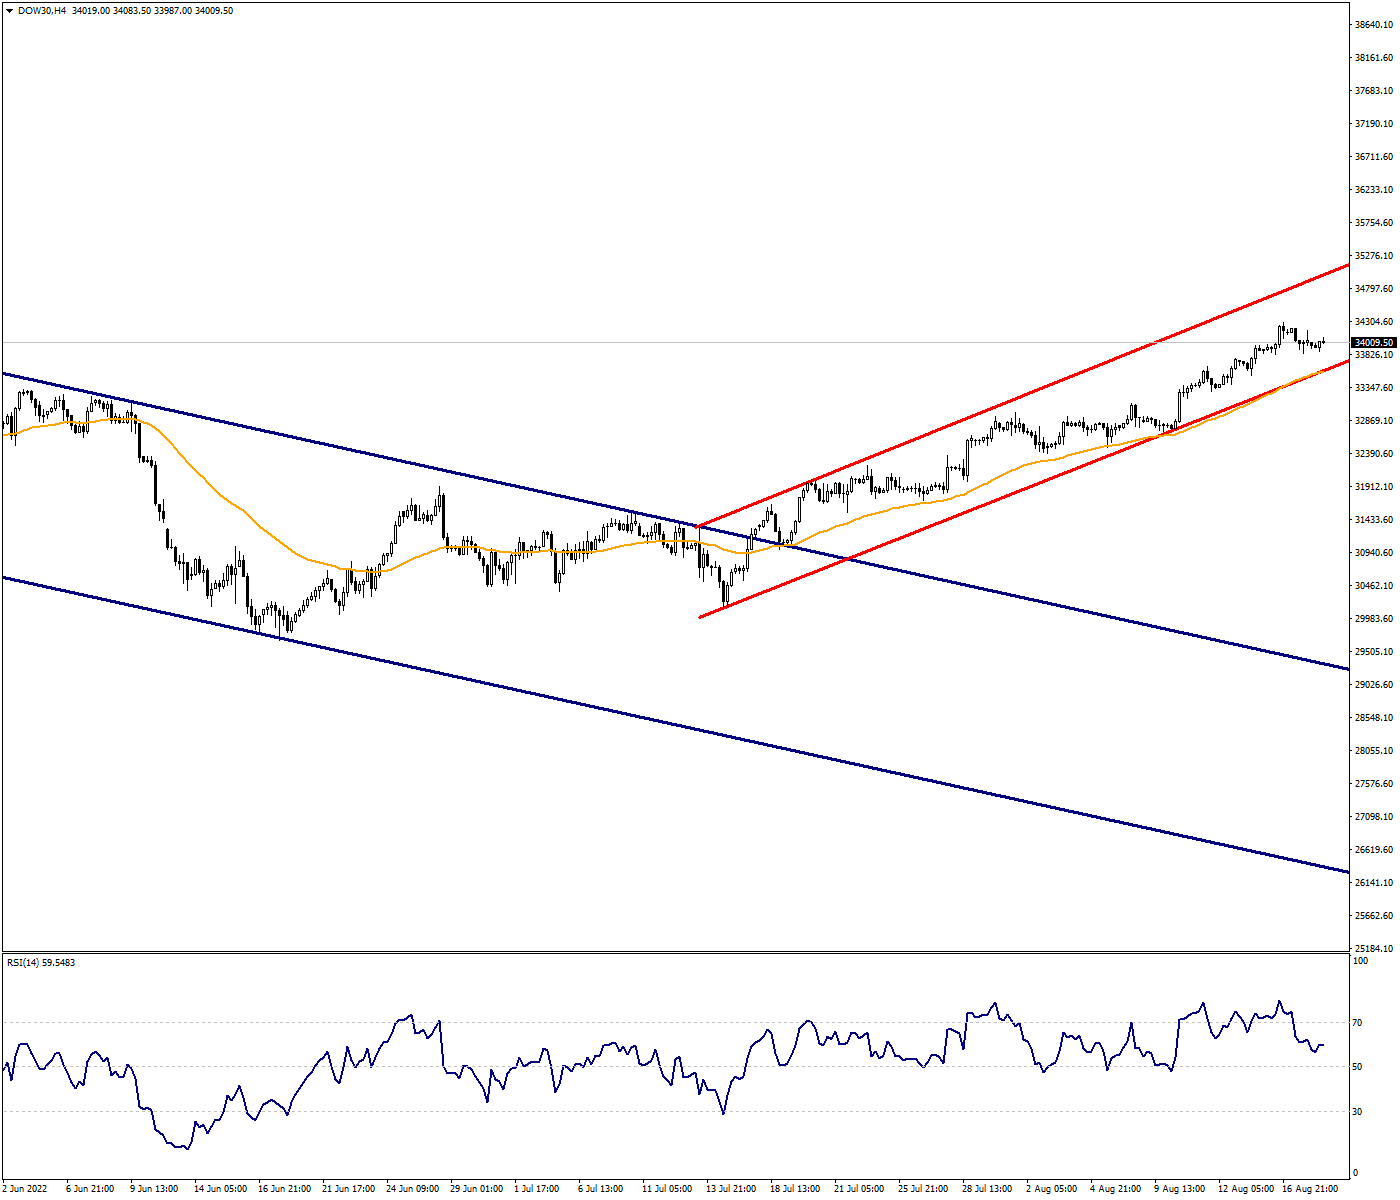 DOW30 May Continue Its Movements in the Ascending Channel